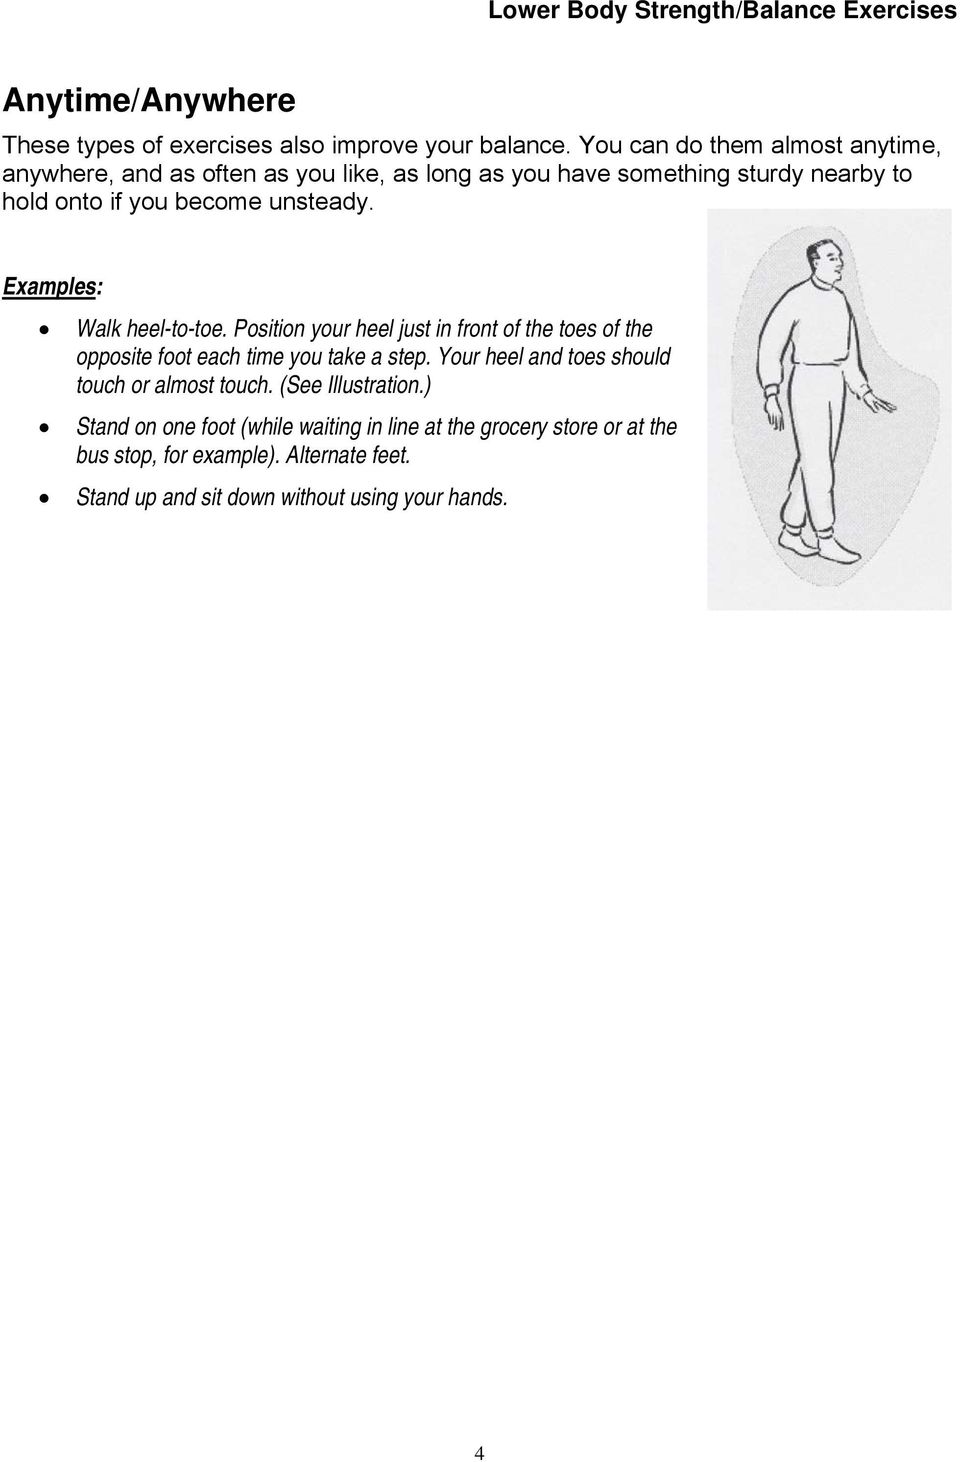 Examples: Walk heel-to-toe. Position your heel just in front of the toes of the opposite foot each time you take a step.